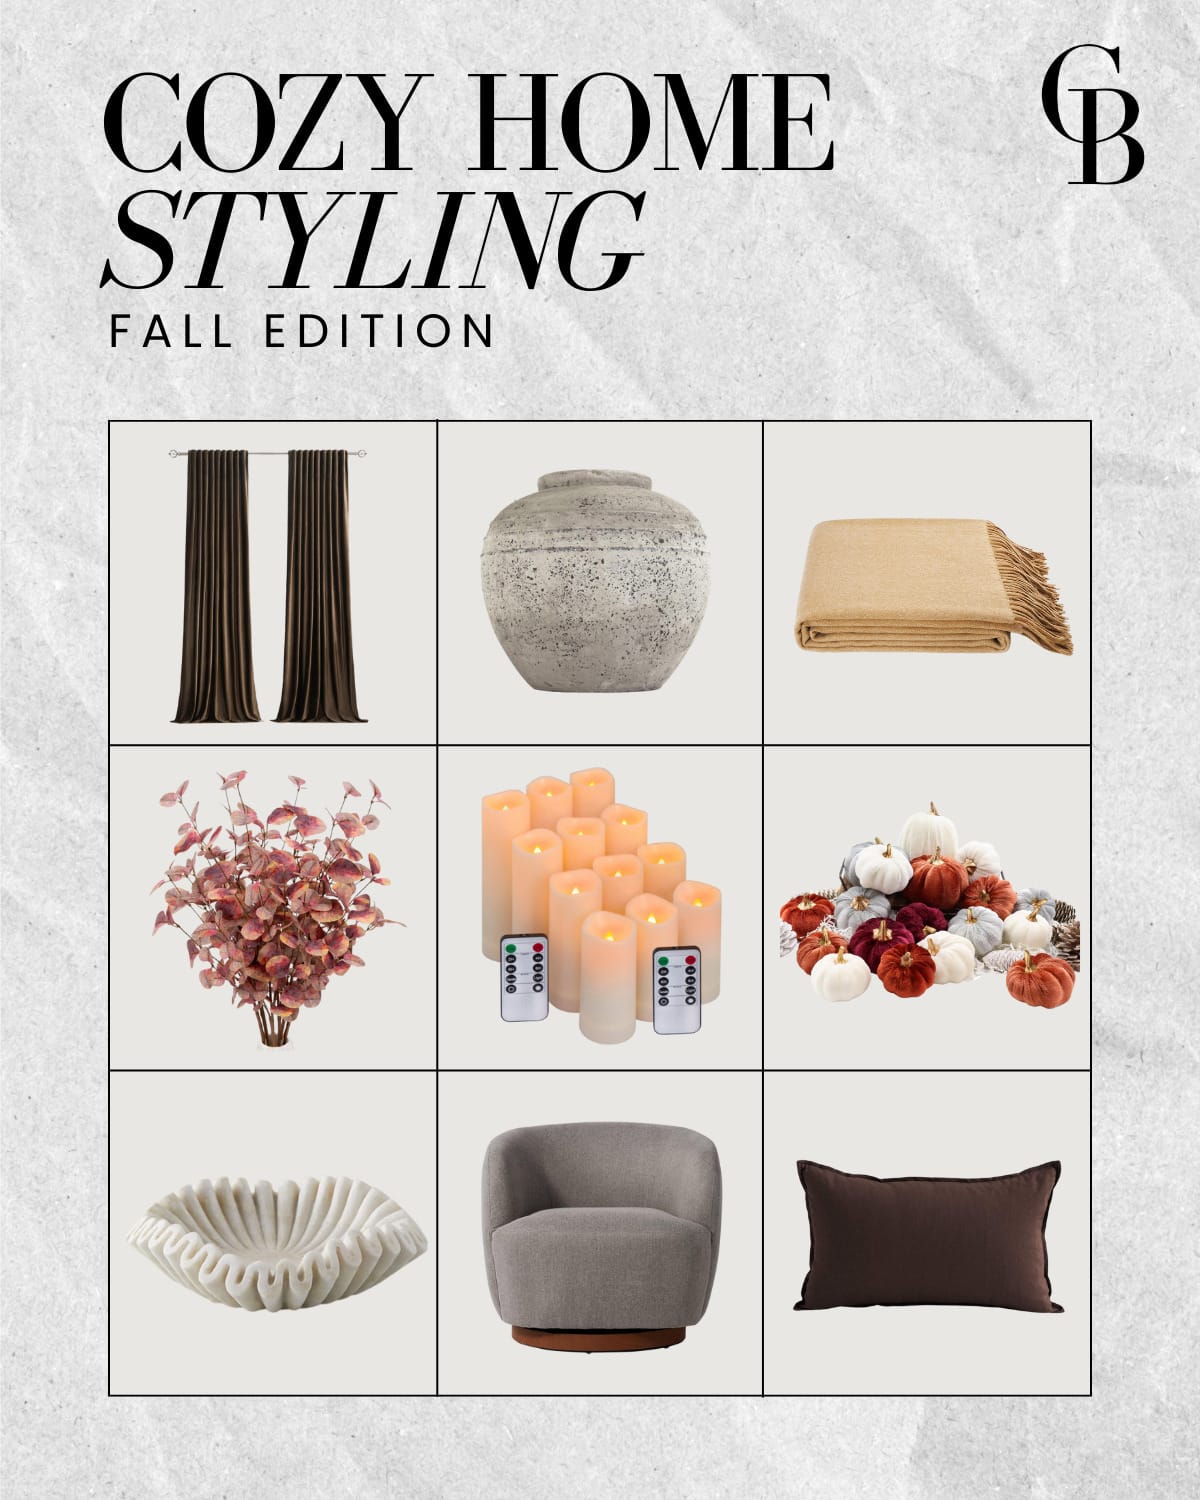 cozy home styling fall edition | #cozy #home #styling #fall #edition #pillow #autumn #pumpkin #couch #comfy #floral #accentchair #bowl #drapes #velvet #blanket #pillows